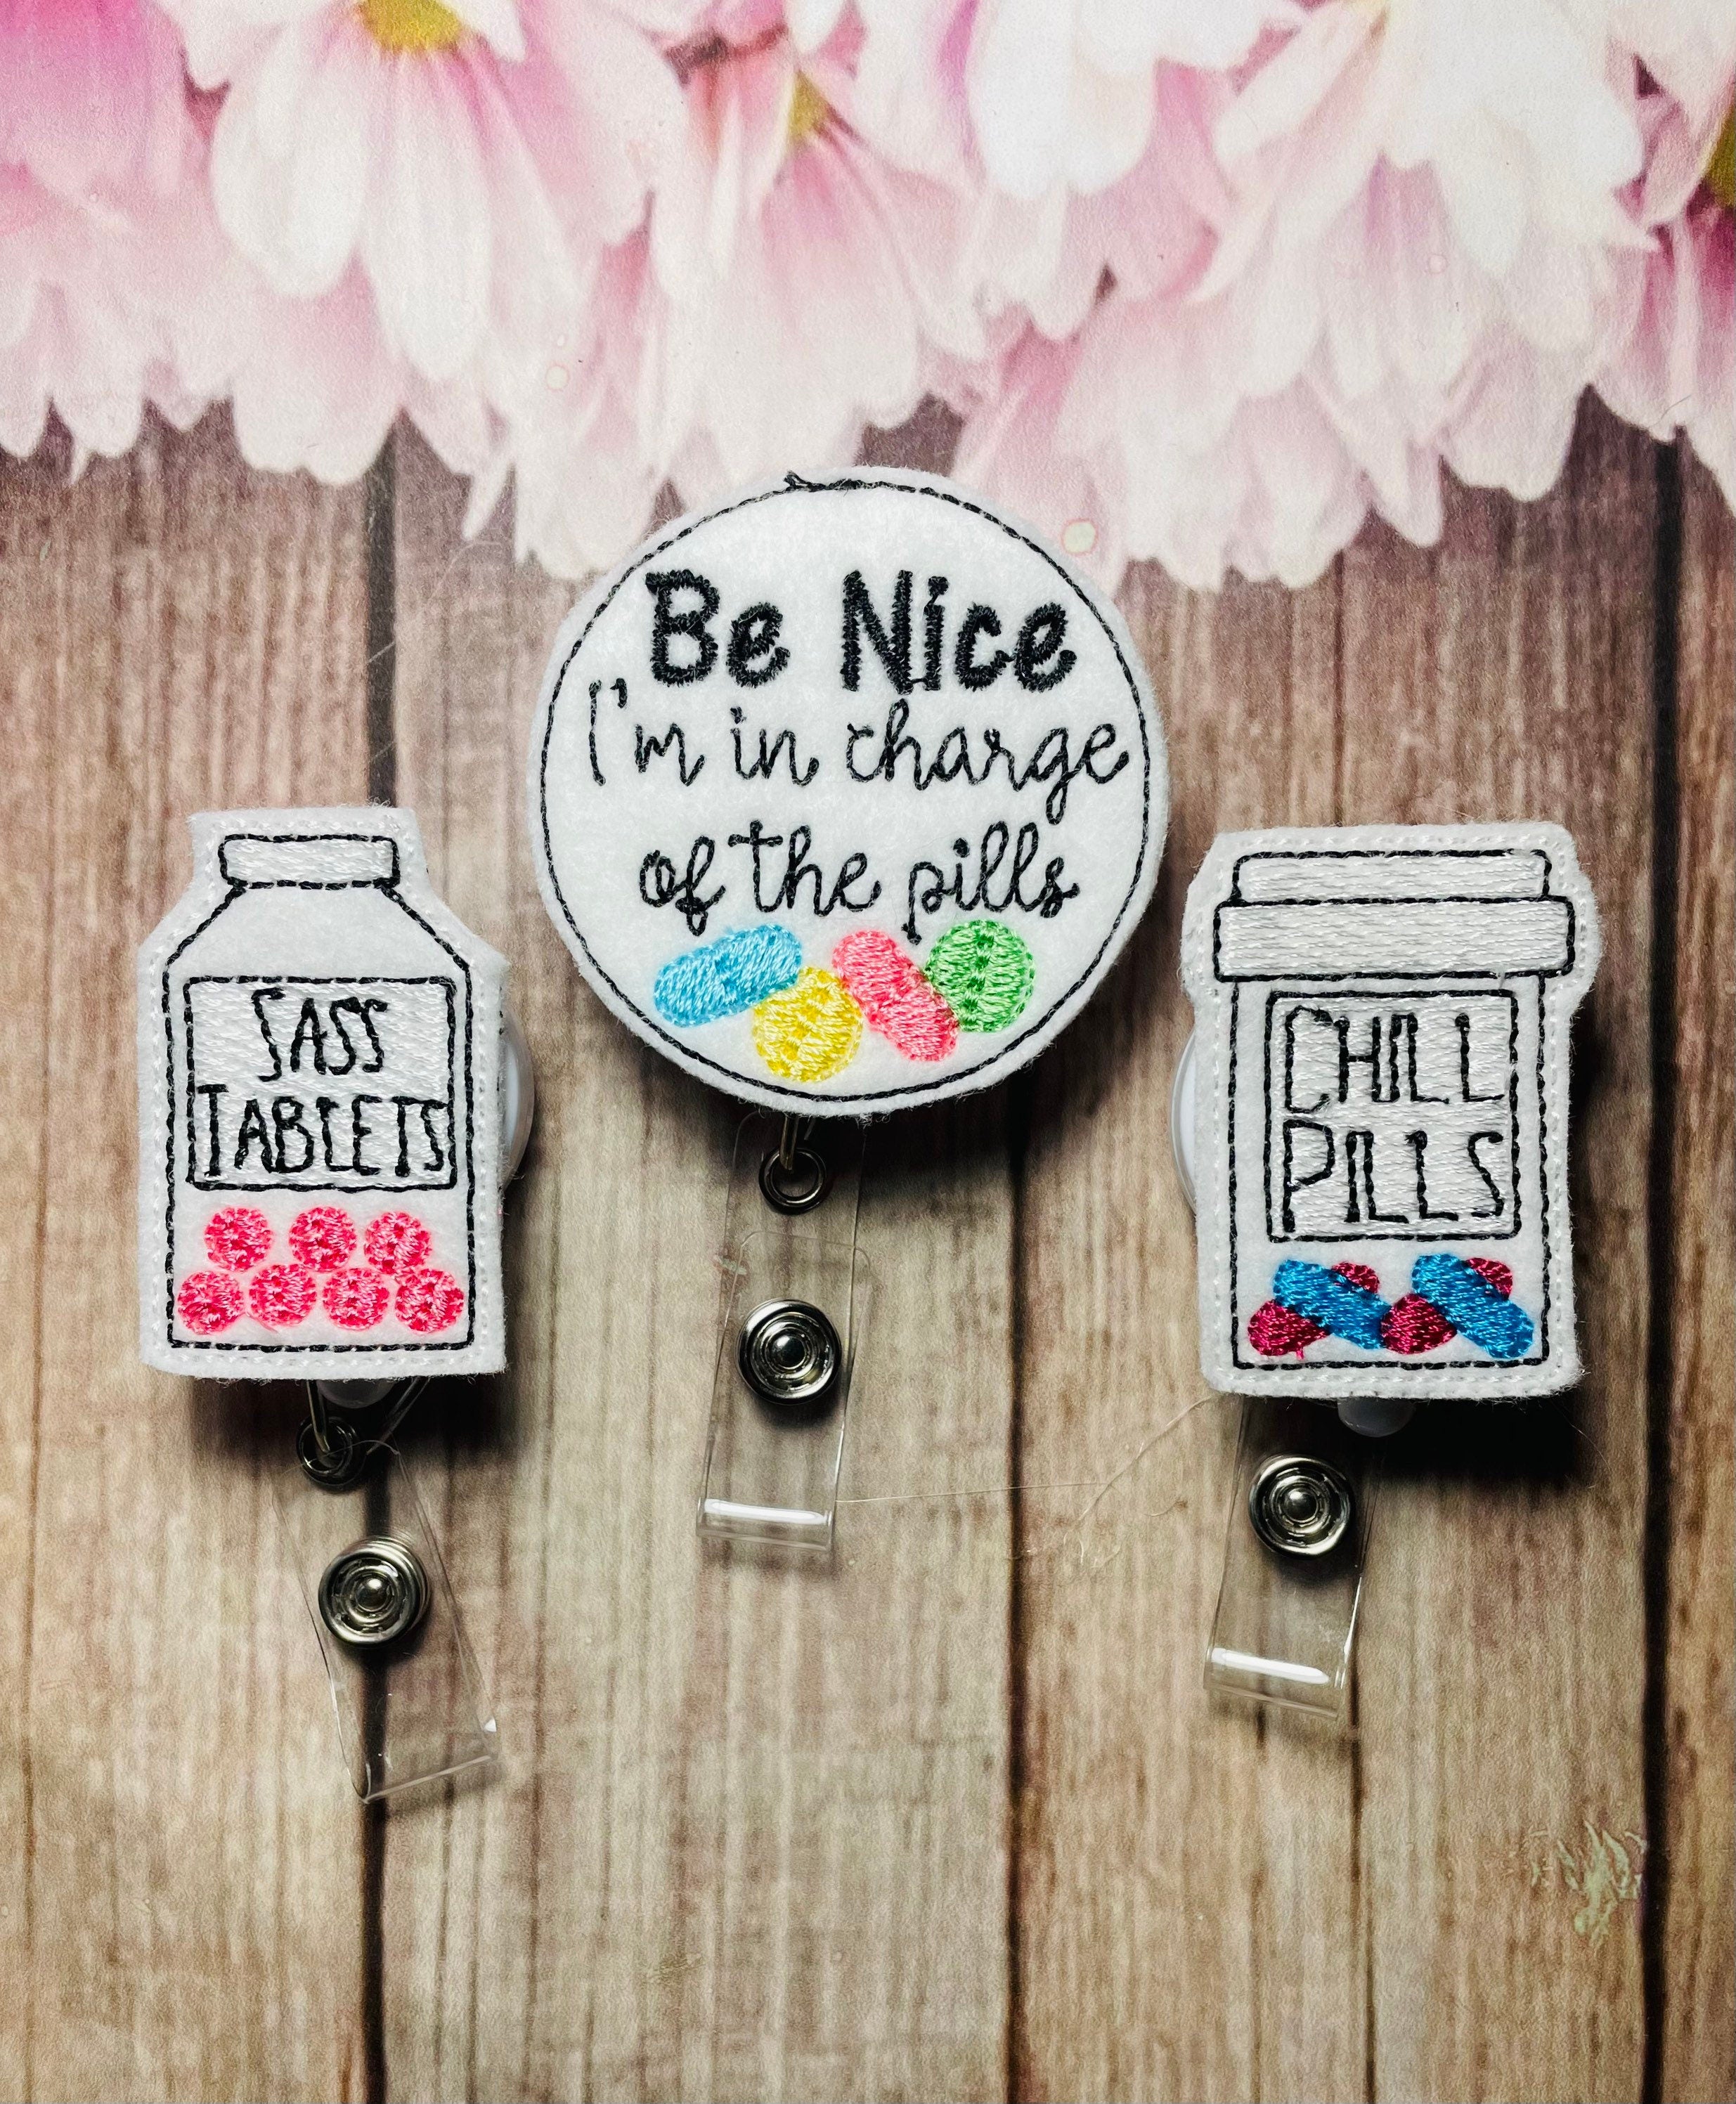 Be nice I'm in charge of the pills pharmacy badge reel – tabbycatclips